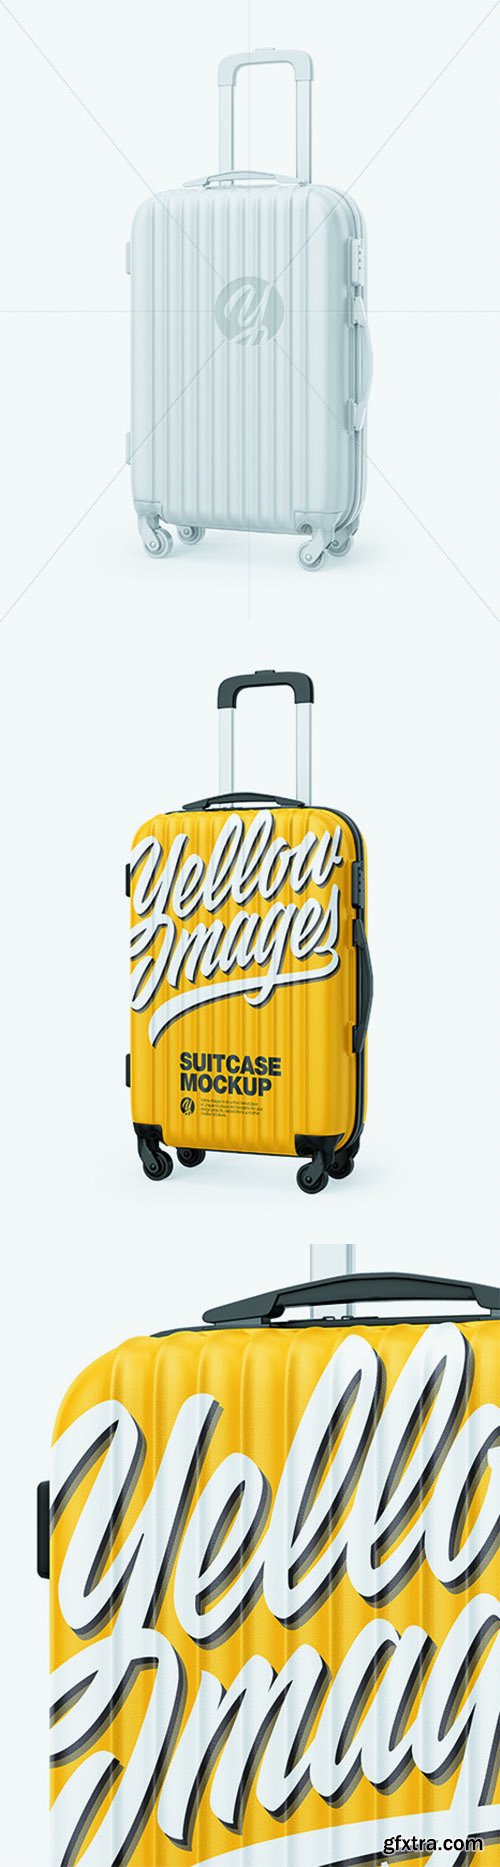 Travel Suitcase Mockup - Half Side View 68868